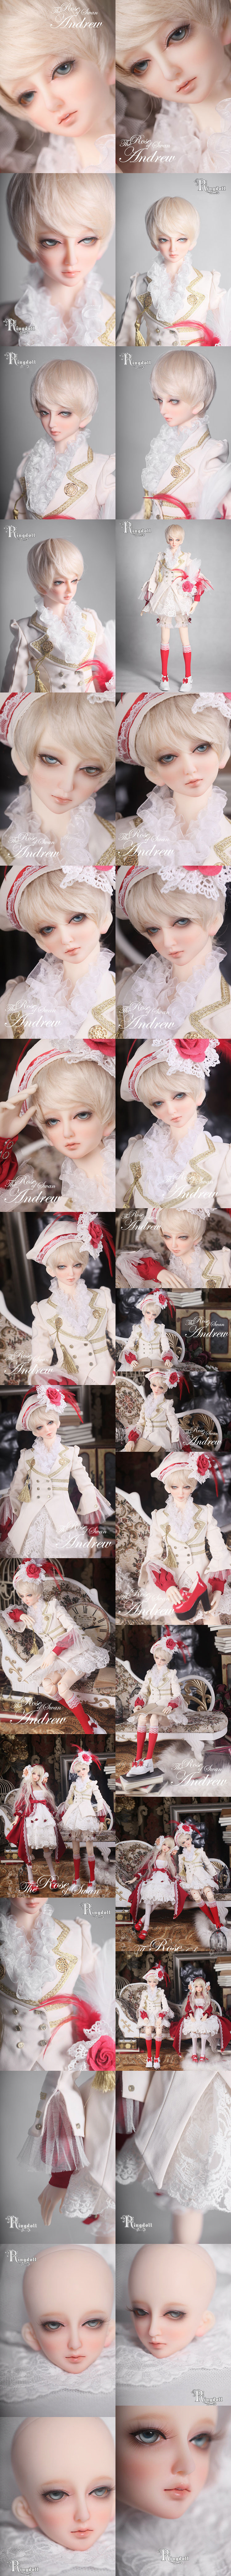 BJD Andrew Boy 62cm Boll-jointed doll